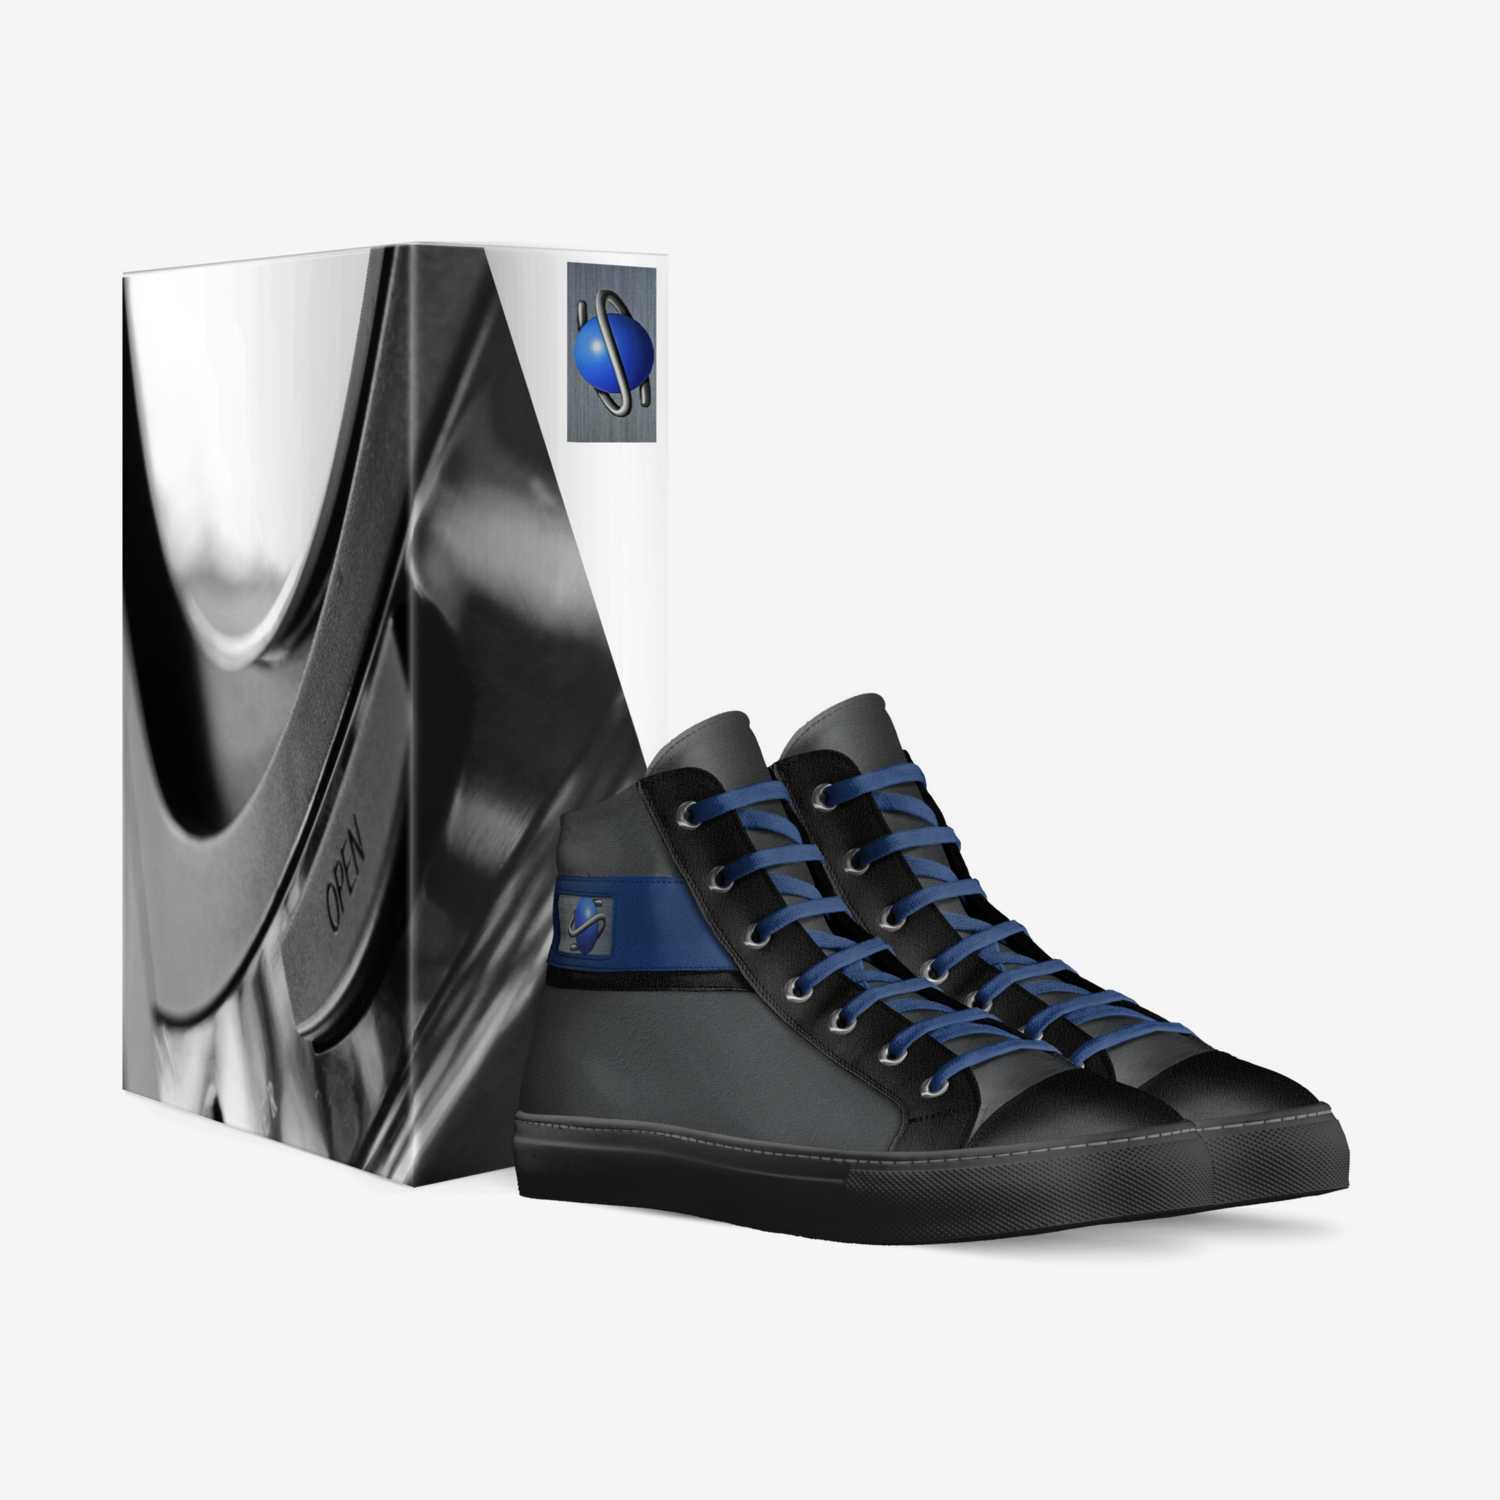 Saturn custom made in Italy shoes by Christian Rivera-vega | Box view